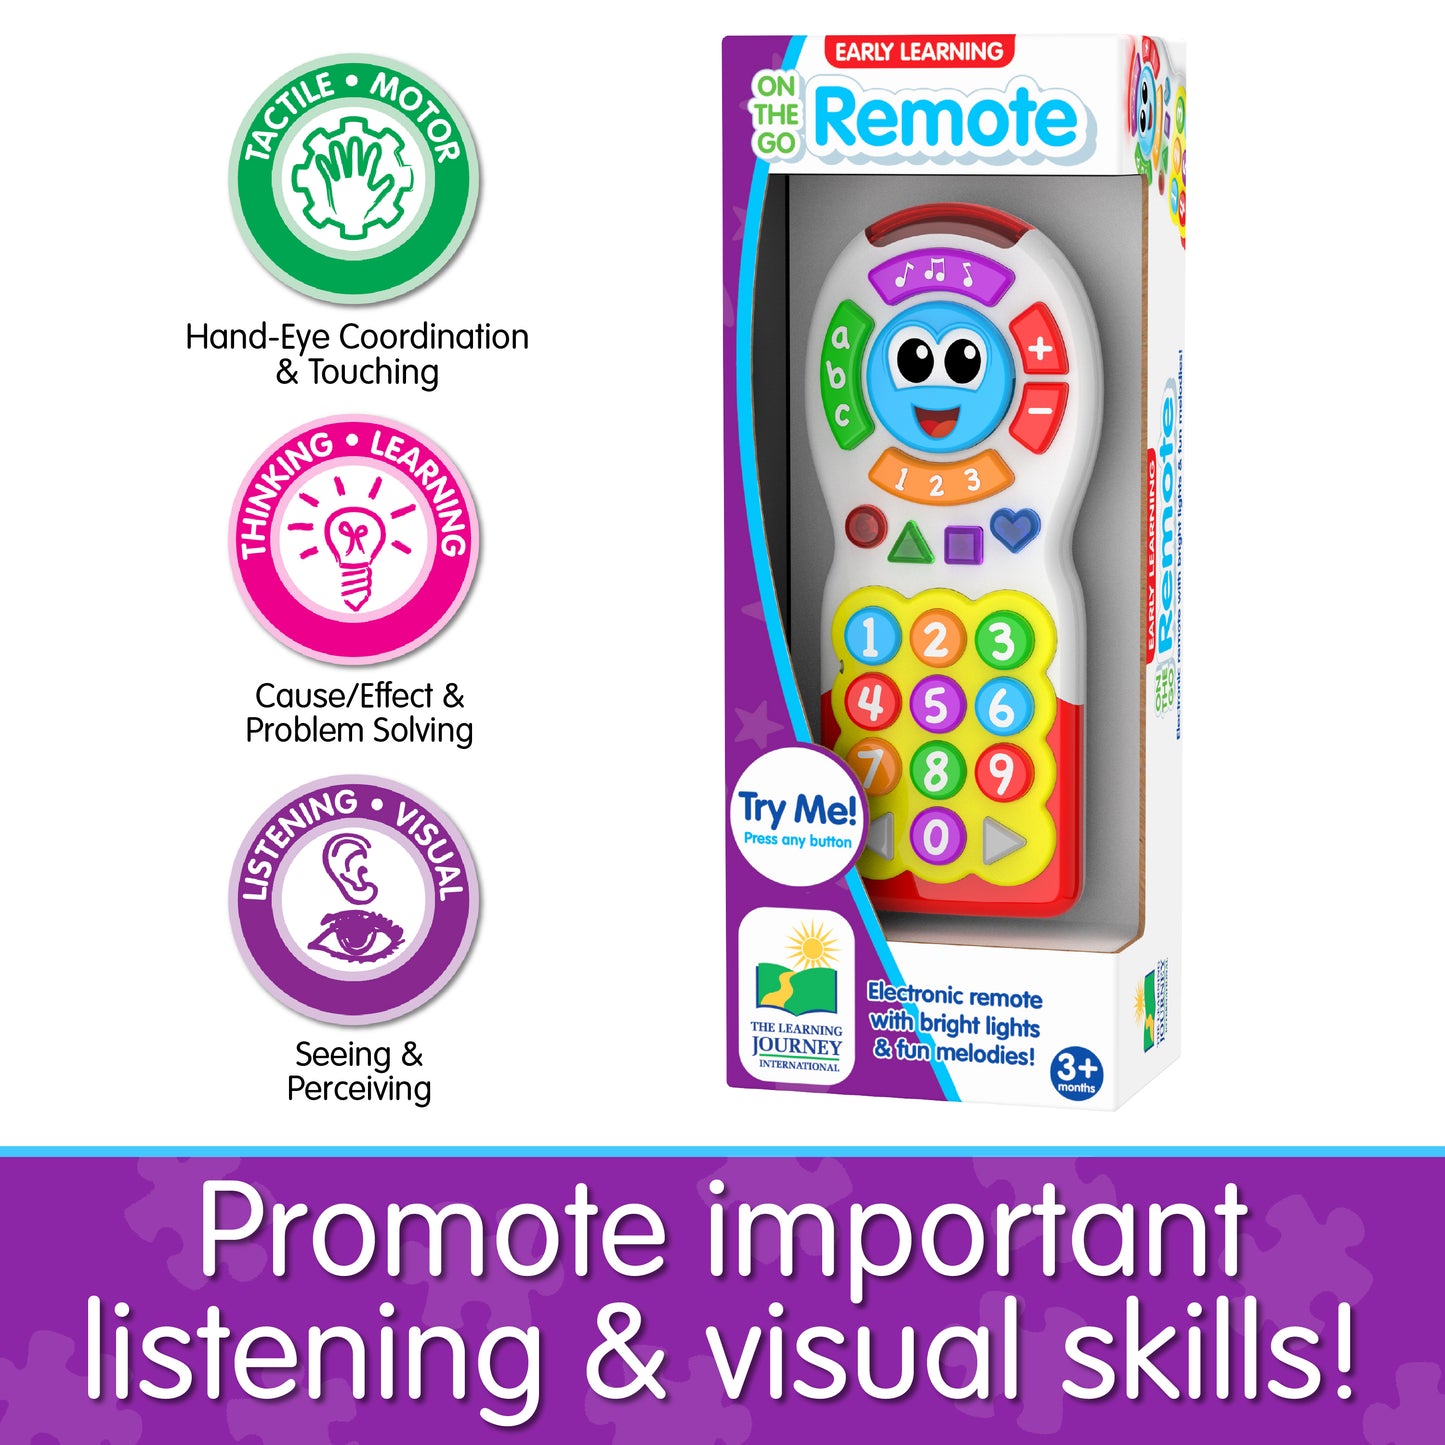 Infographic about On The Go Remote's educational benefits that says, "Promote important listening and visual skills!"